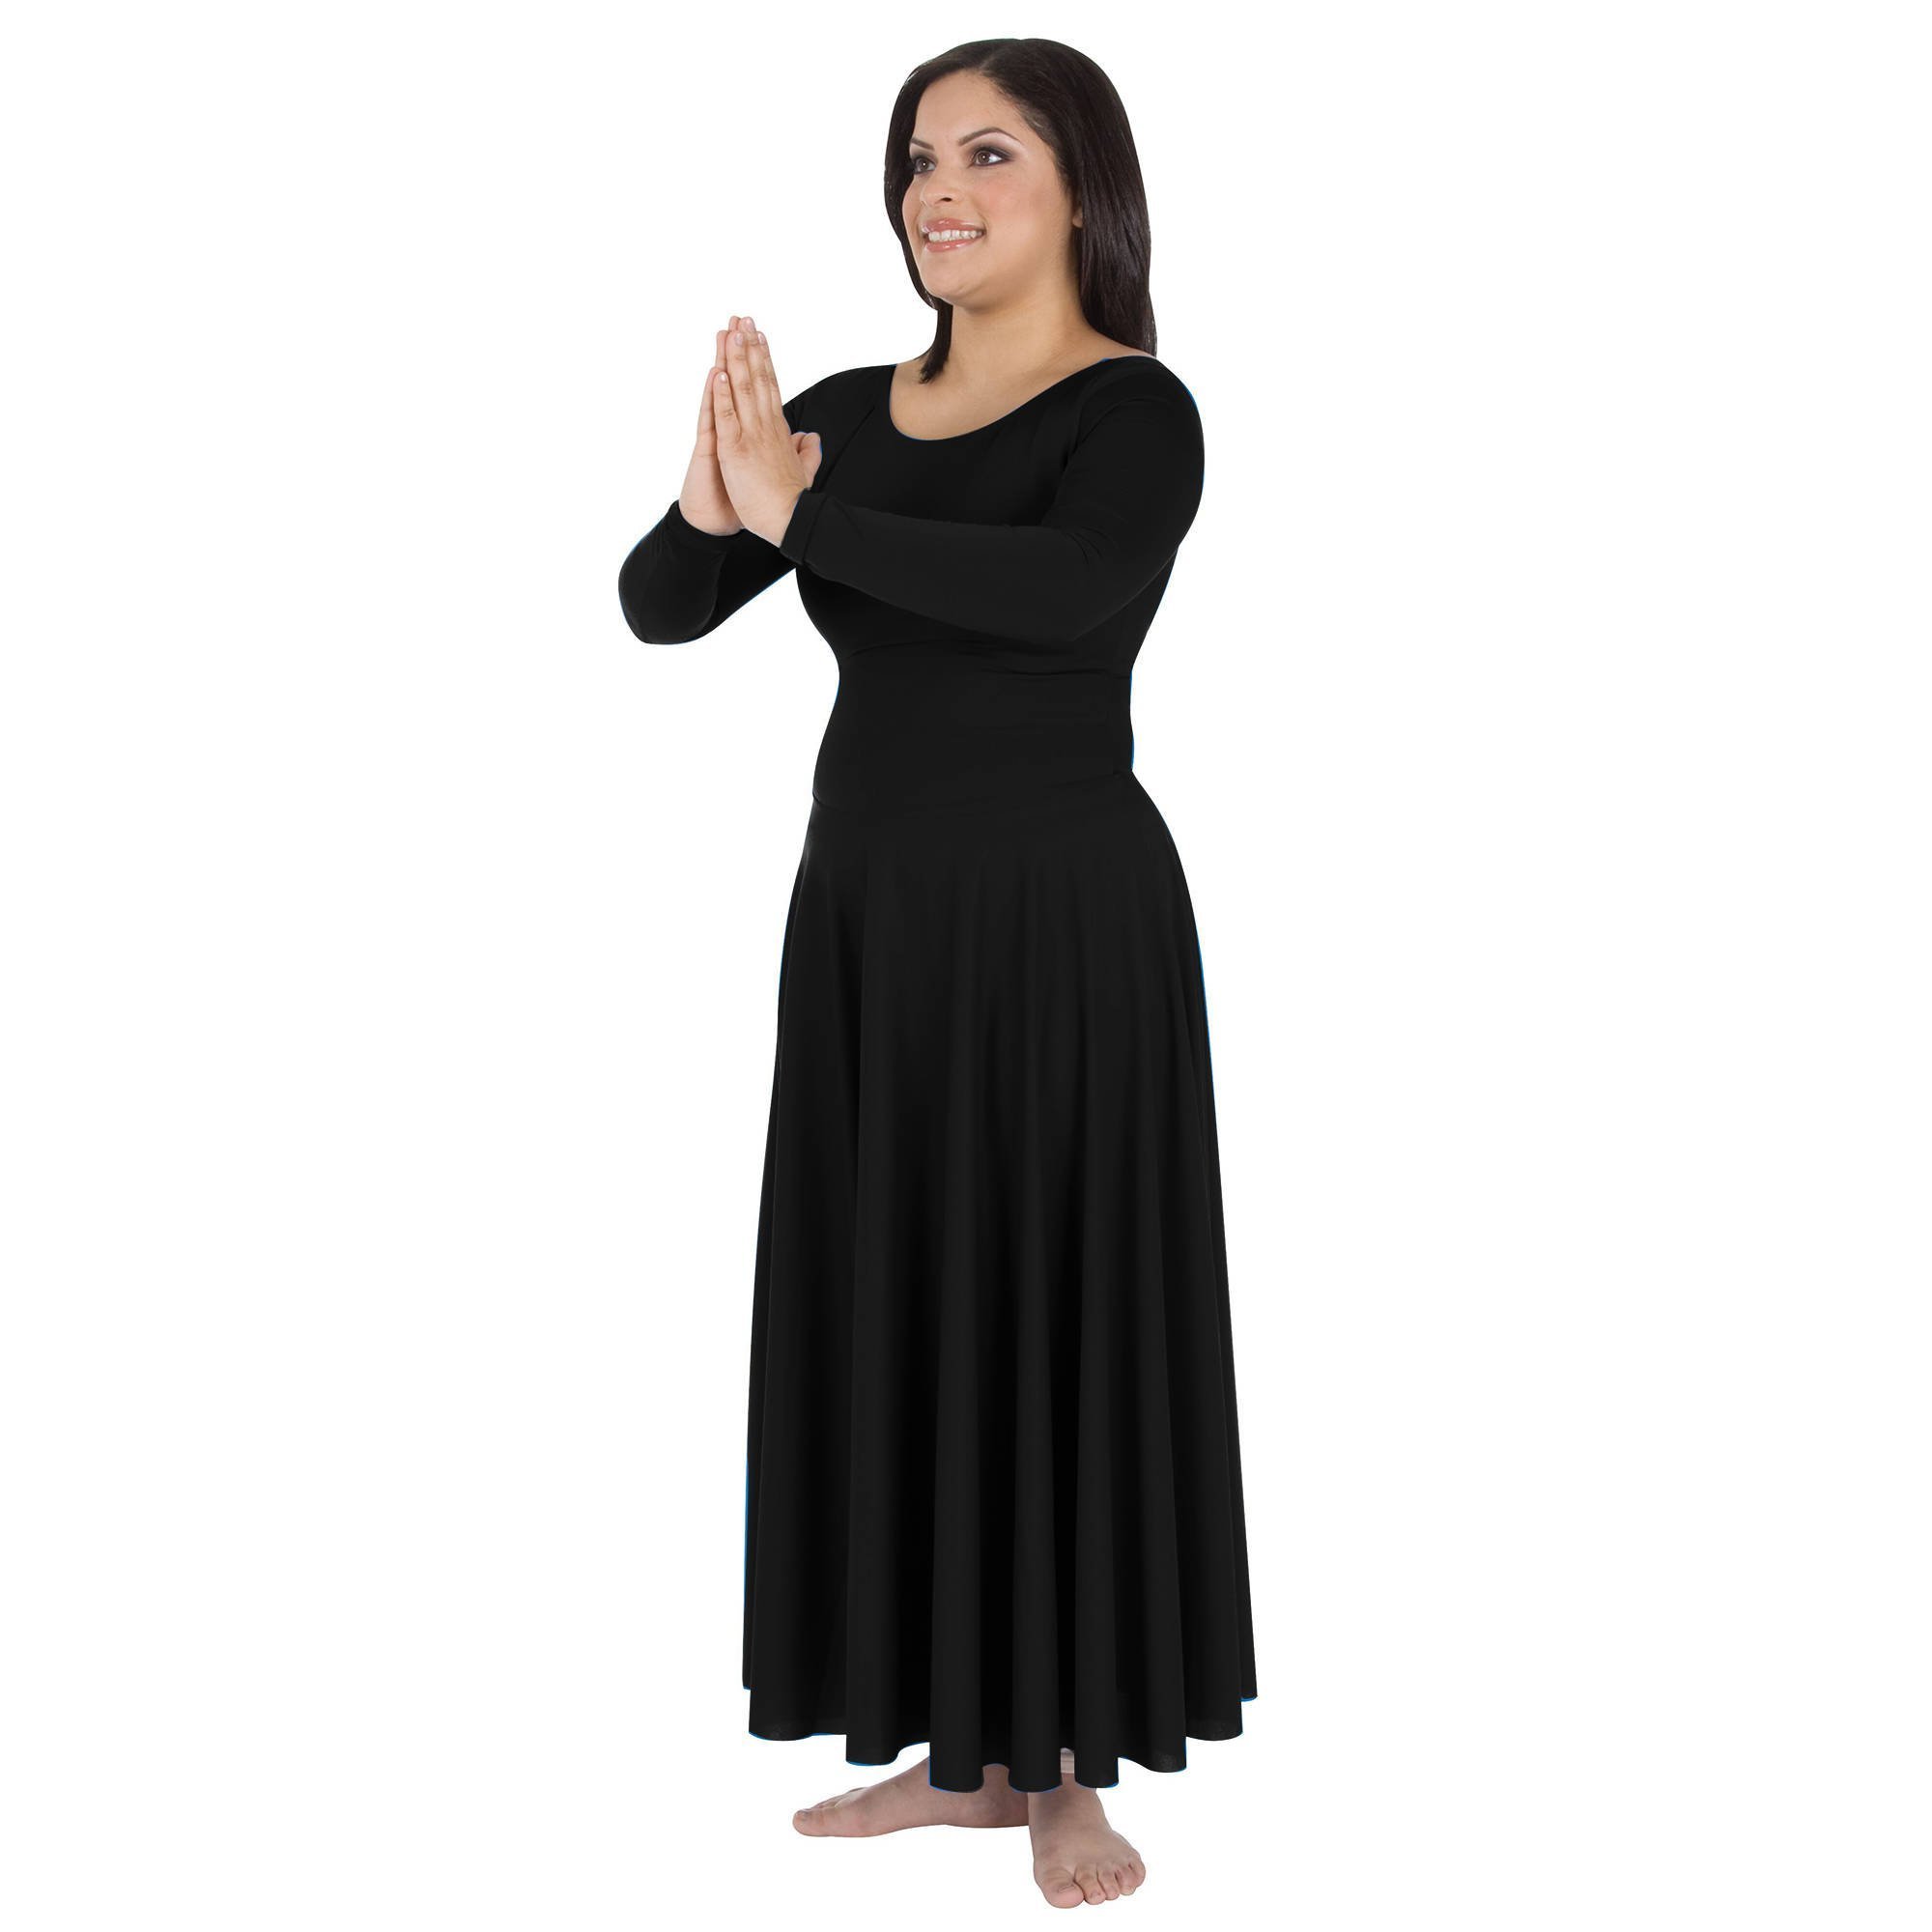 Body Wrappers Long Sleeve Praise Dance Dress - Click Image to Close